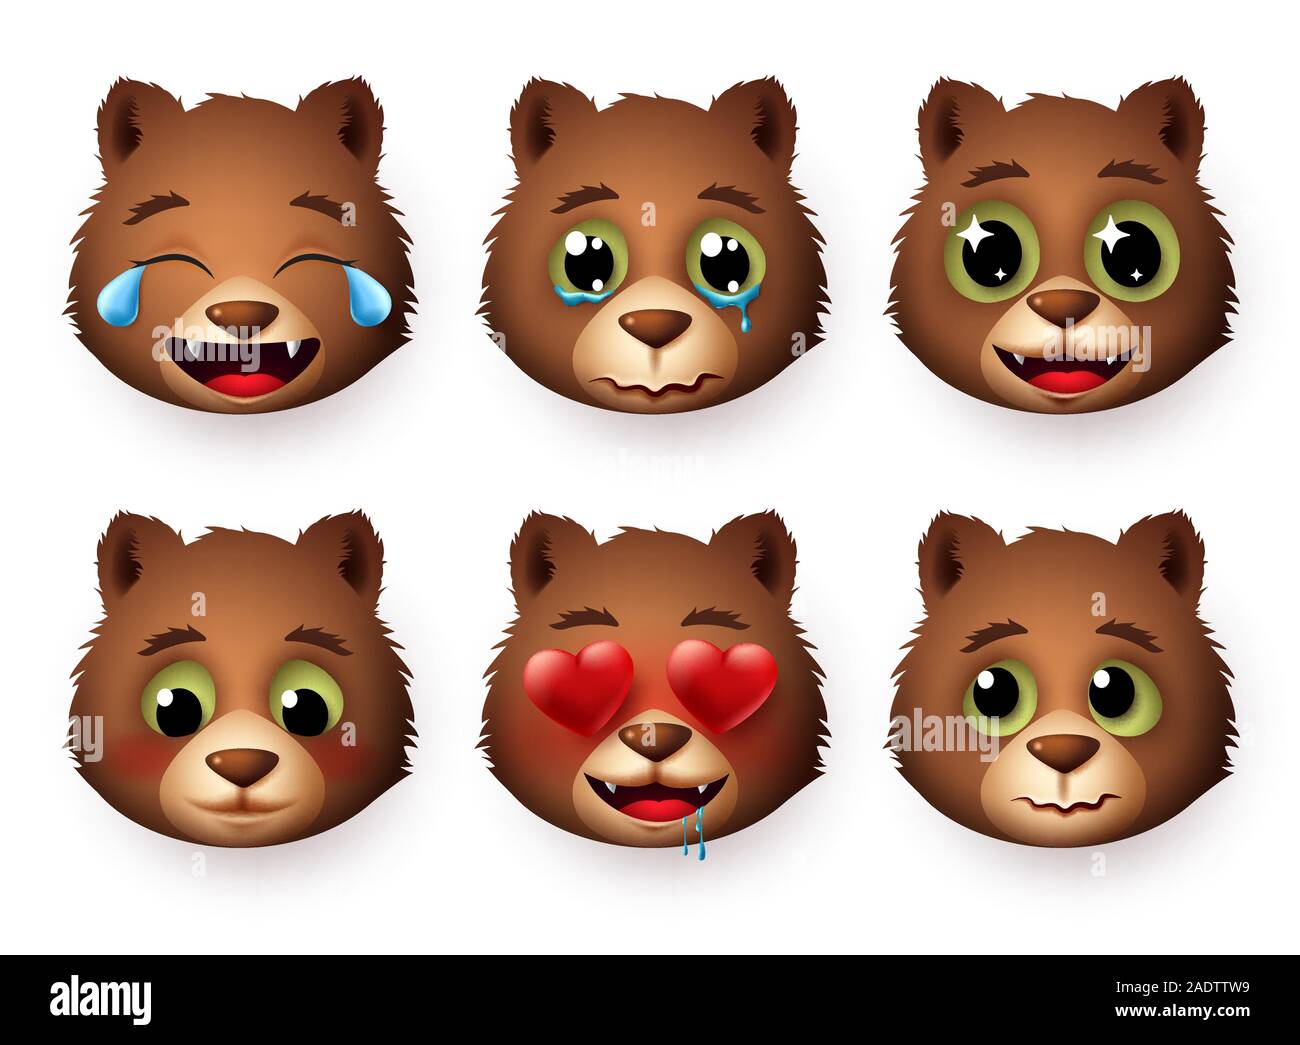 Emojis of panda face vector set. Pandas bear head emoticon animal in different expressions with in love, crying, shy, scared and laughing isolated. Stock Vector